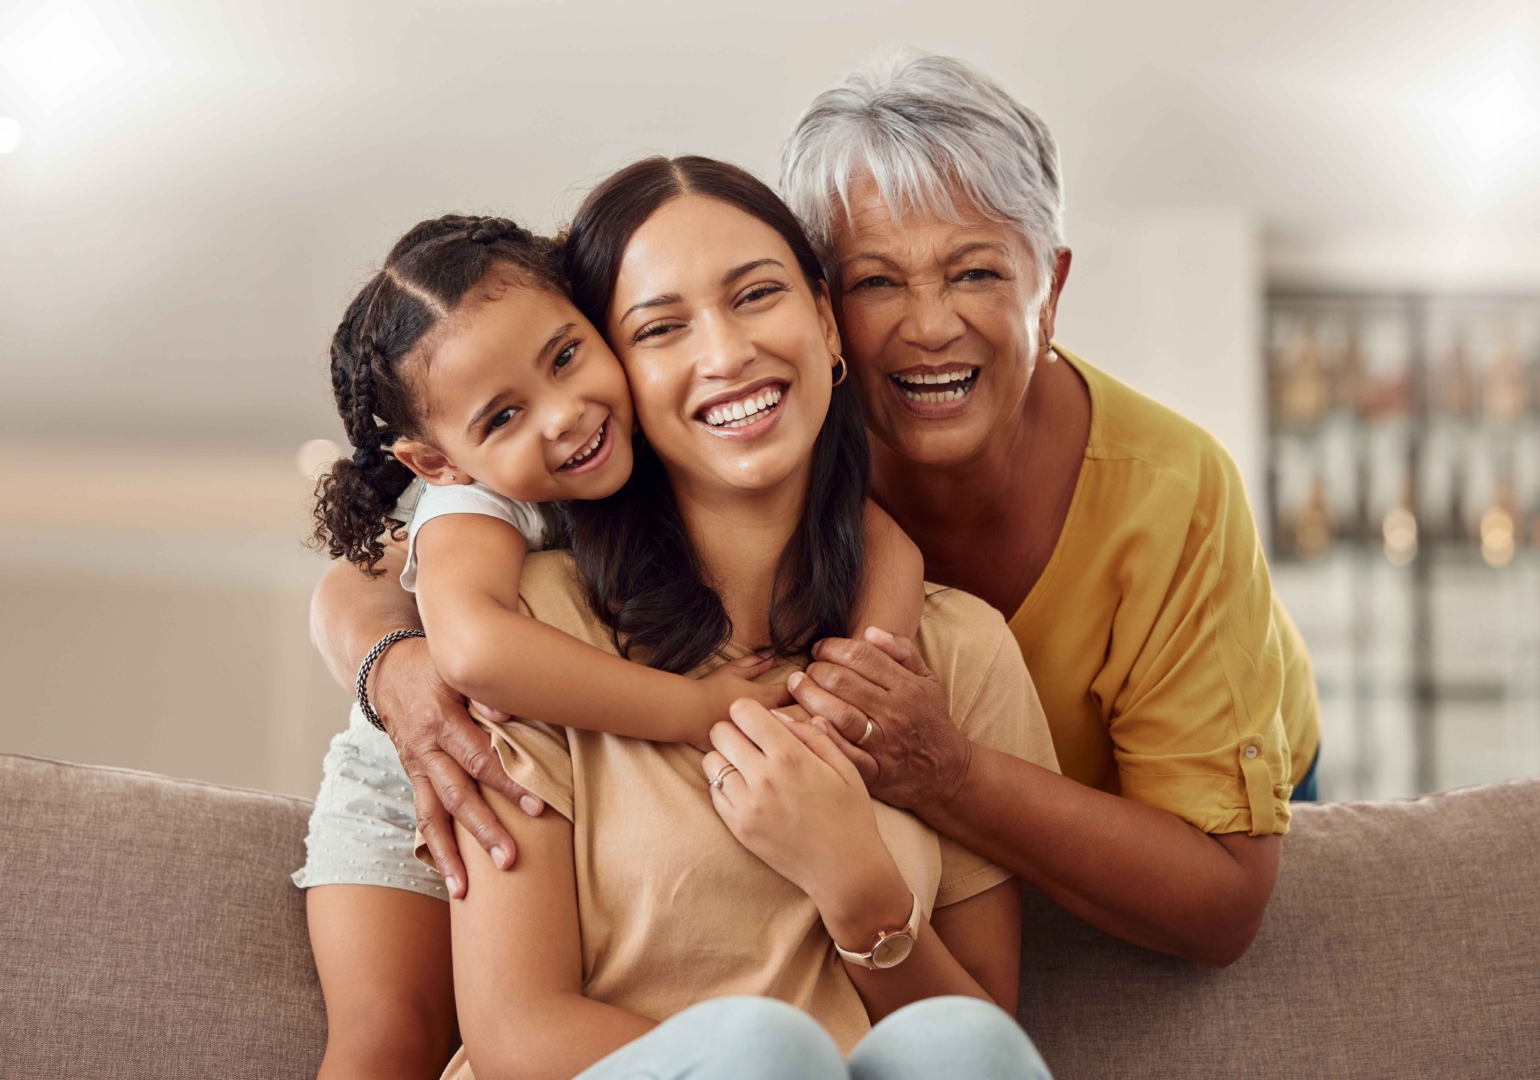 Grandmother, mom and child hug in a portrait for mothers day on a house sofa as a happy family in Colombia. Smile, mama and elderly woman love hugging young girl or kid and caring for aging parents.